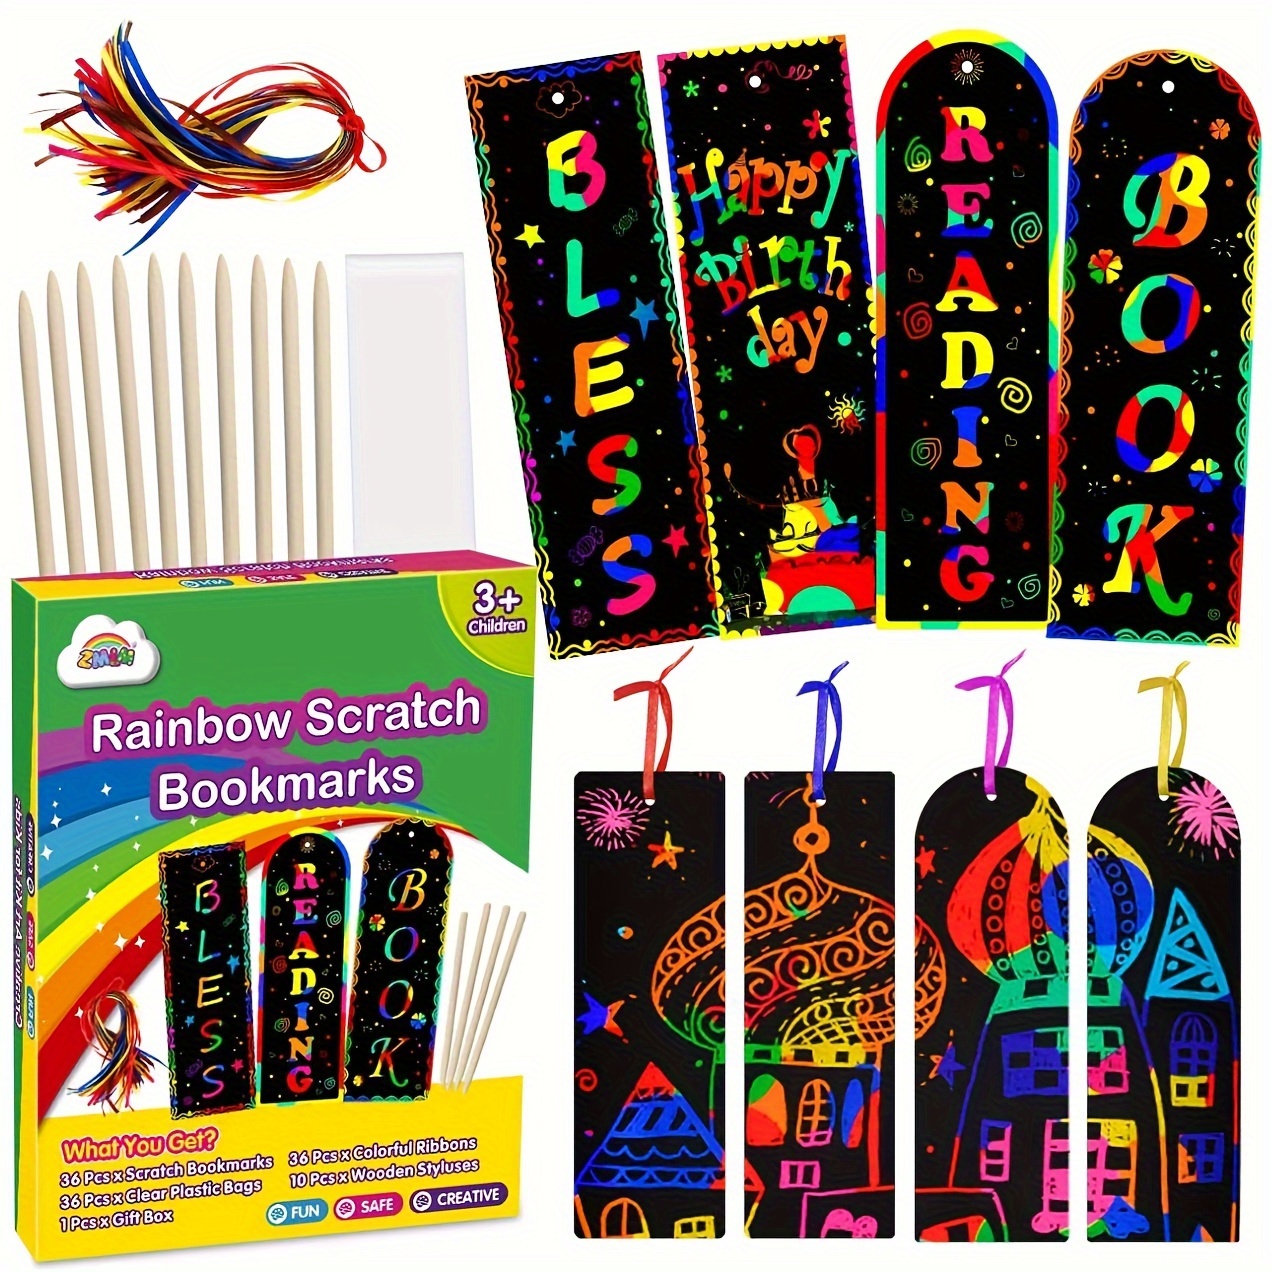 Magic Scratch Rainbow Bookmarks, Animal Scratch Art Bookmark Black Scratch  Paper Bookmark With 50 Pcs Colourful Ribbons 50 Pcs Wooden Stylus For Diy C